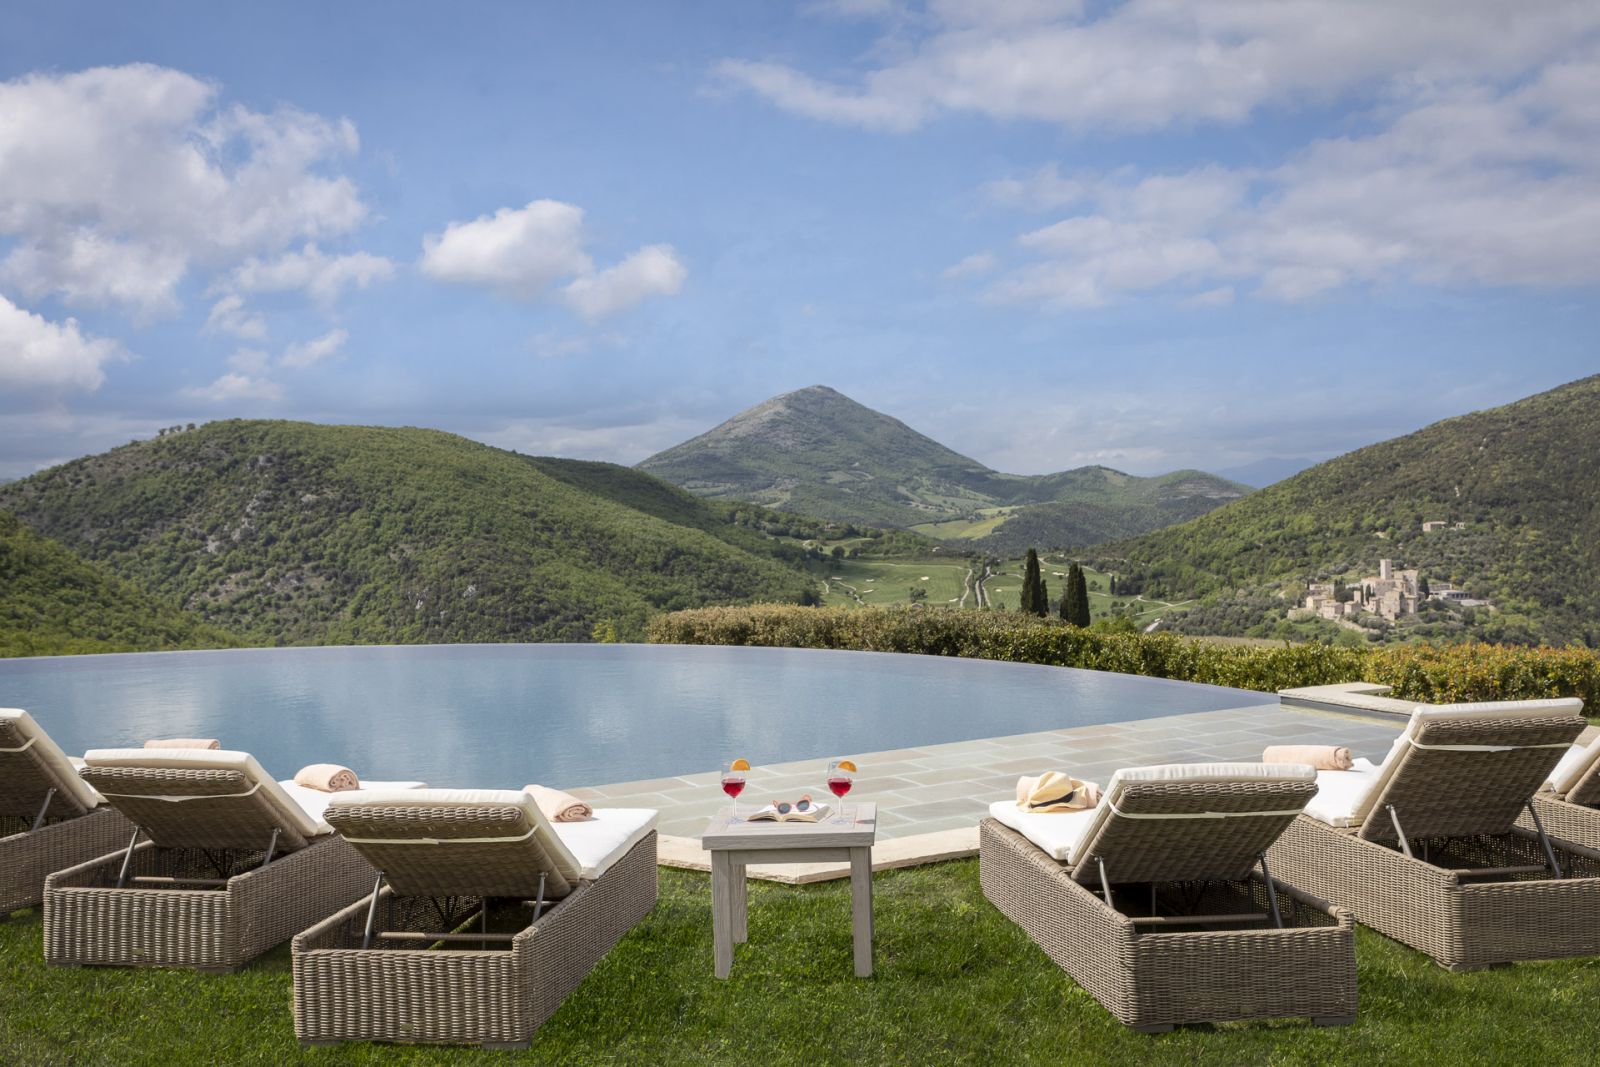 Pool view from sun loungers at Villa Arpeggio, Umbria 